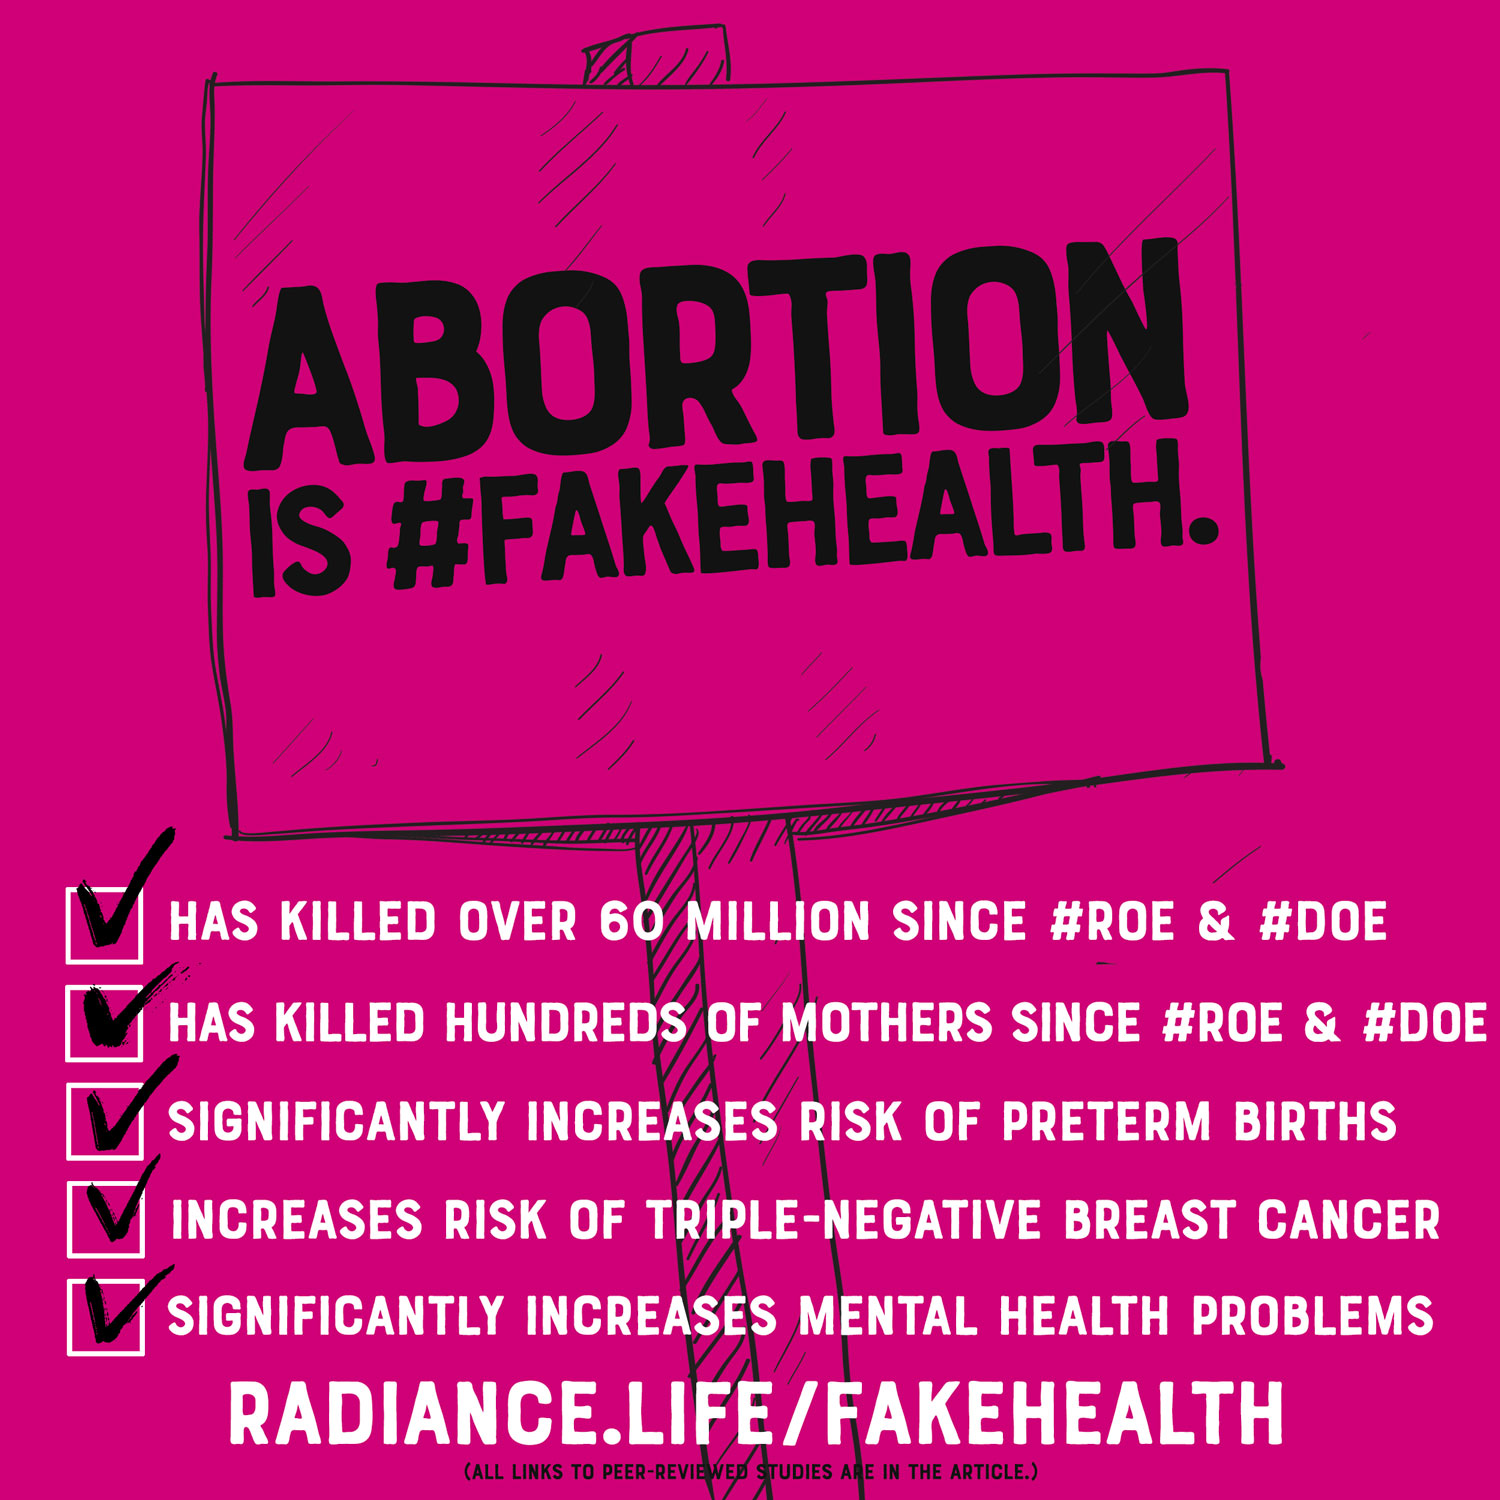 Abortion is fake health.